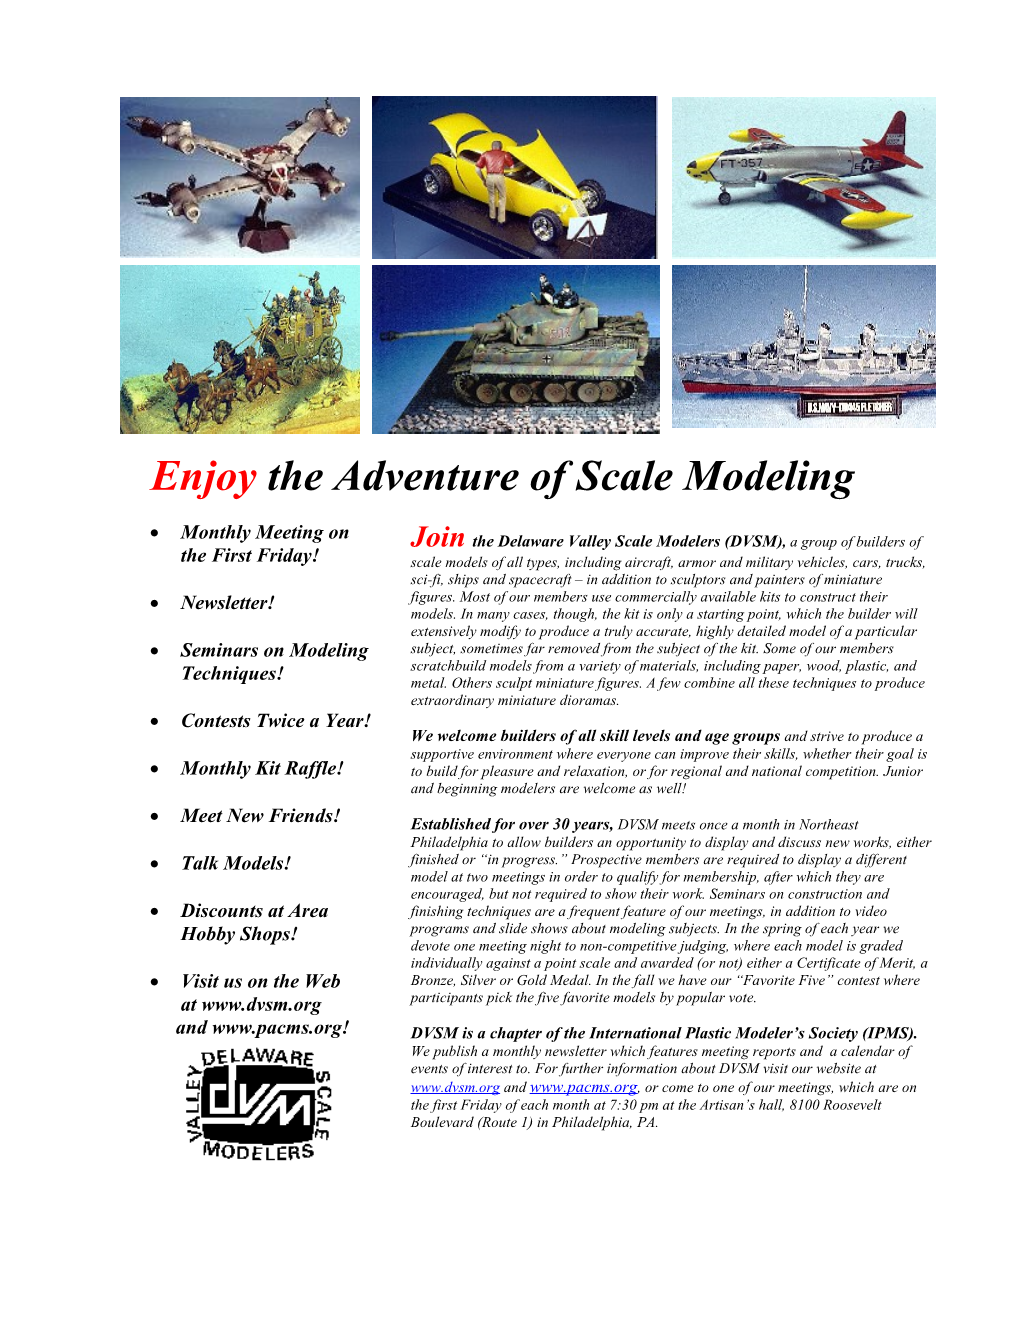 Enjoy the Adventure of Scale Modeling